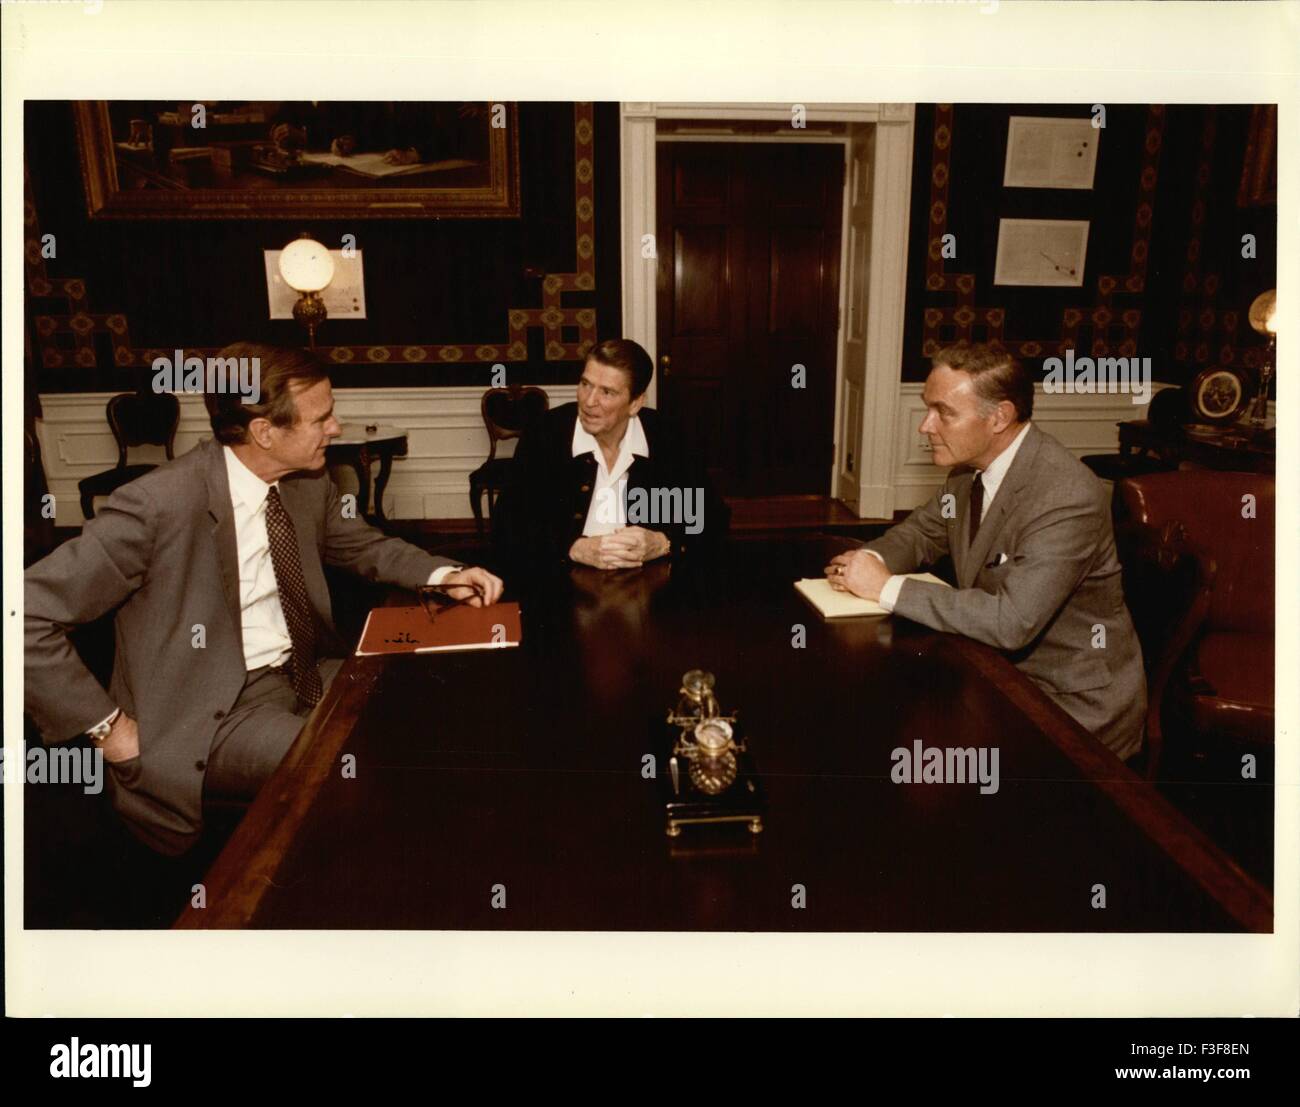 1987 - President Reagan meets with Vice President George Bush and Secretary of State Alexander Haig in Treaty Room, Second Floor Residence, as Haig reports on trip abroad. © Keystone Pictures USA/ZUMAPRESS.com/Alamy Live News Stock Photo